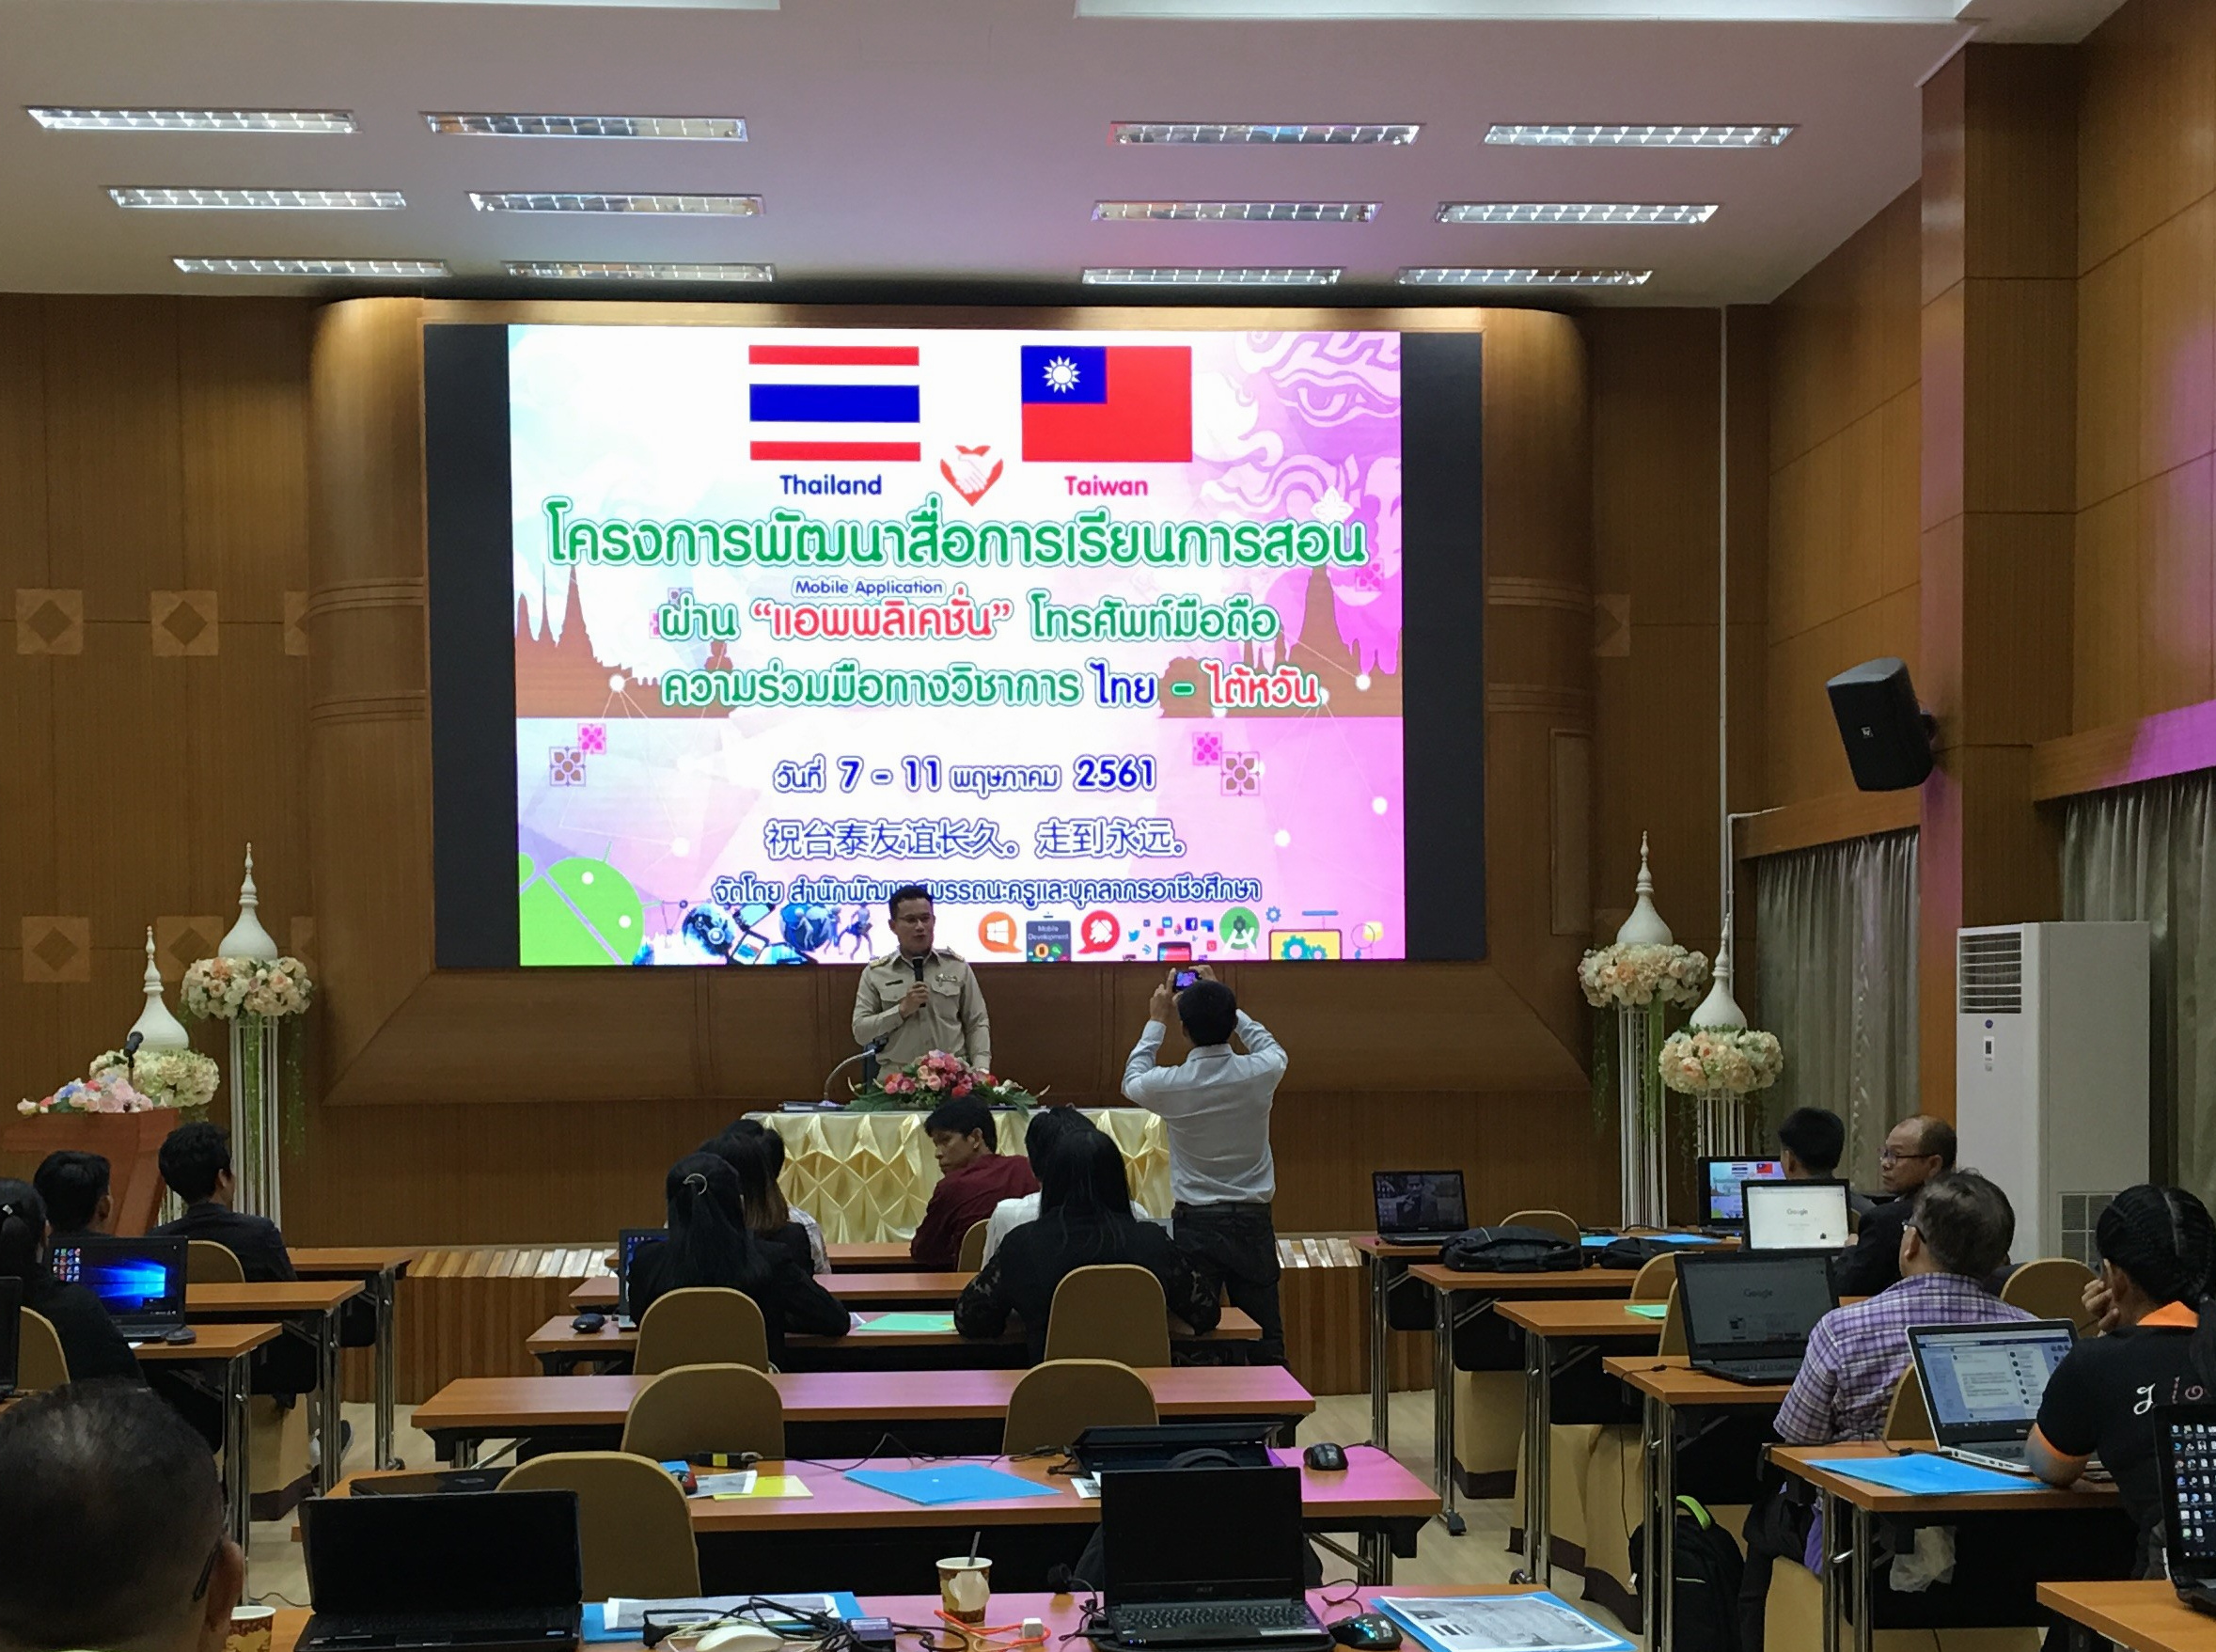 Taiwan Graduate Students Teach Training Courses for Thai Vocational College Teachers on Development of Mobile Device Applications